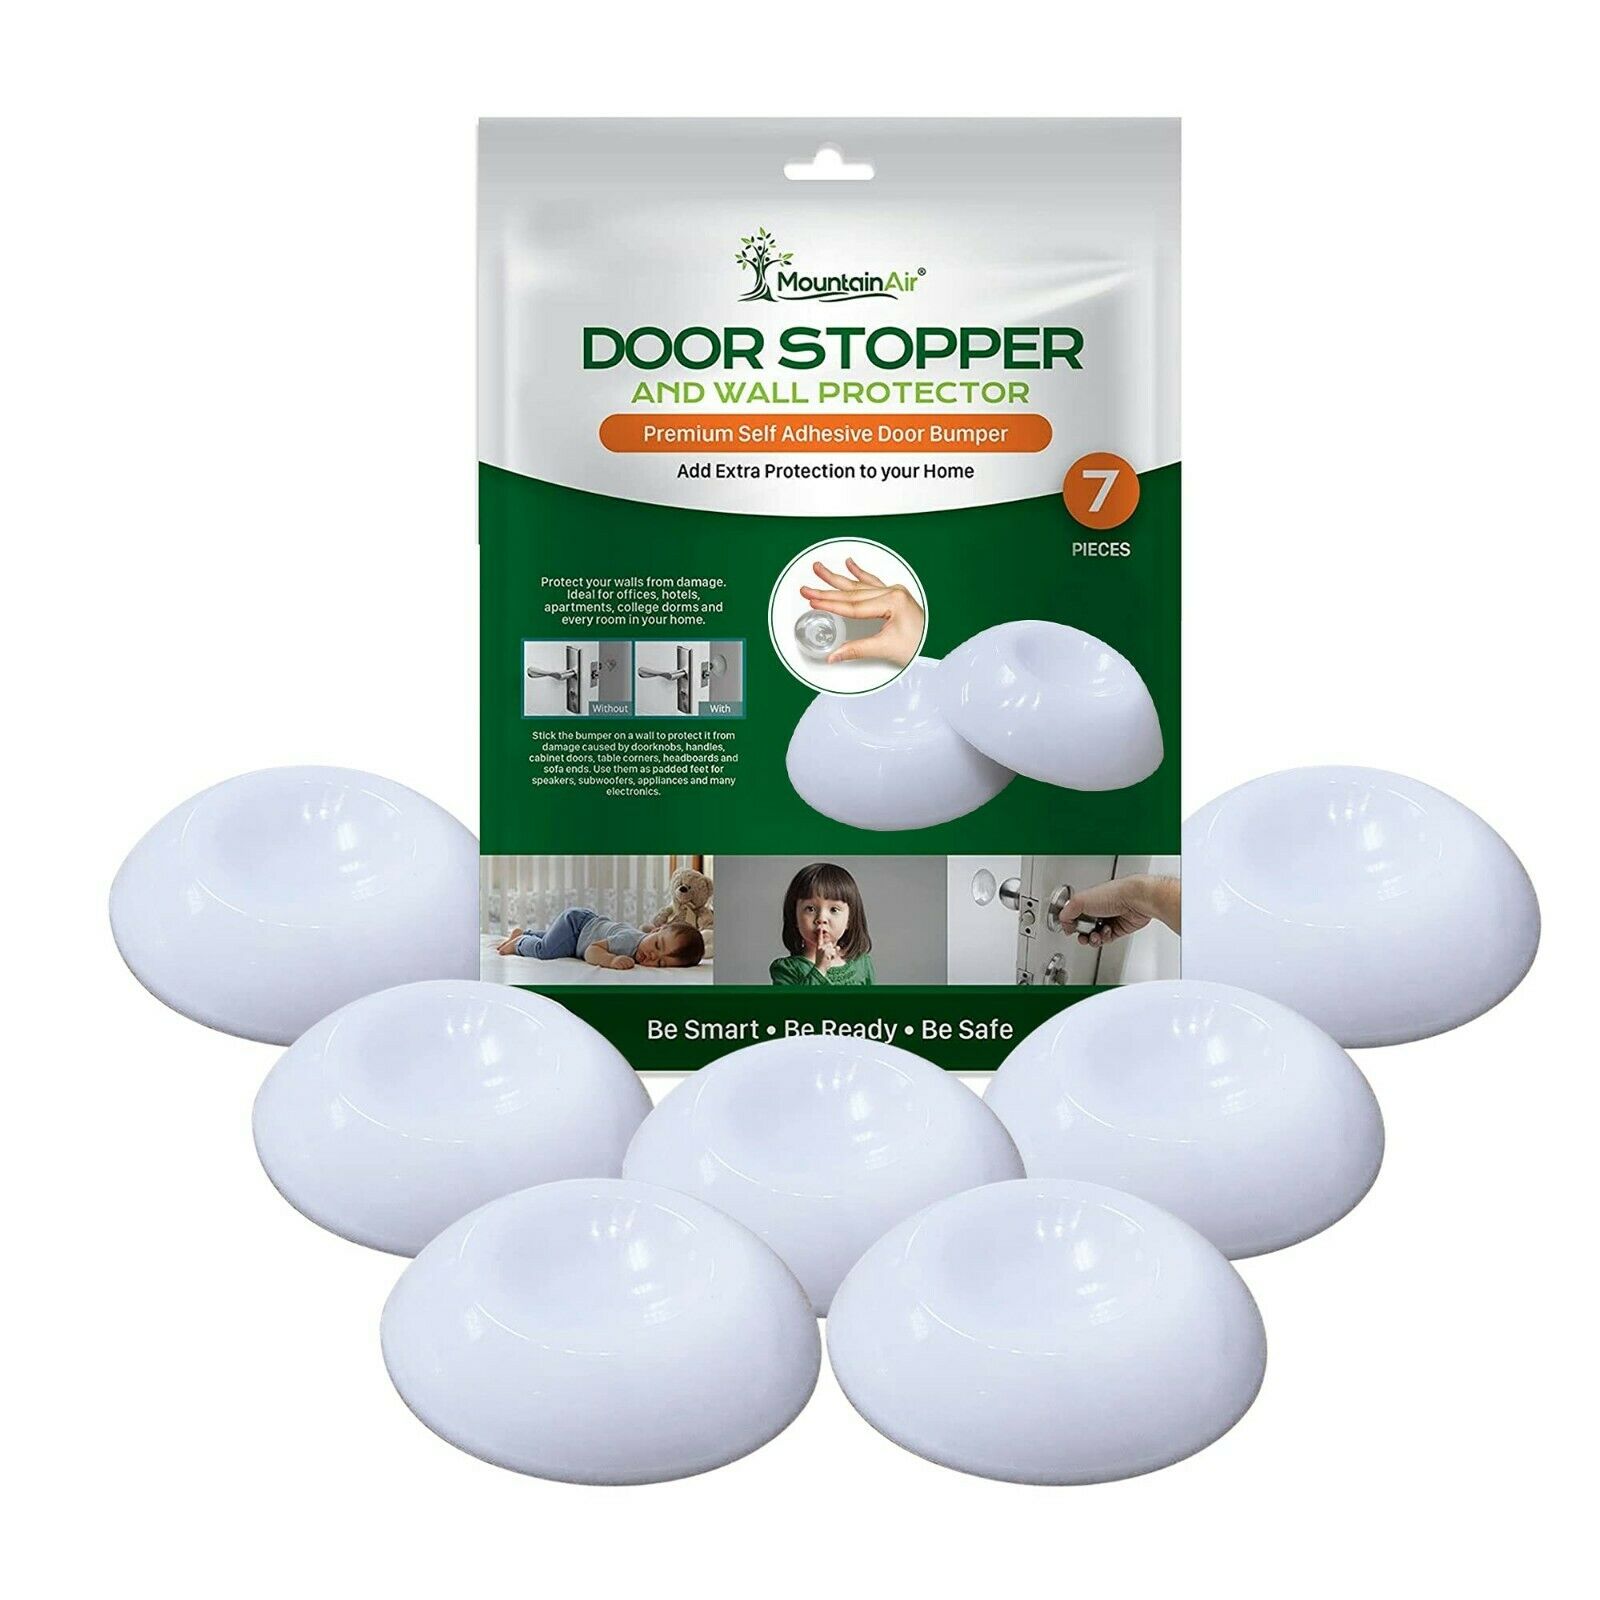 7PCs Self-Adhesive Door Stopper - Clear Round Door Knob Stopper for Wall.